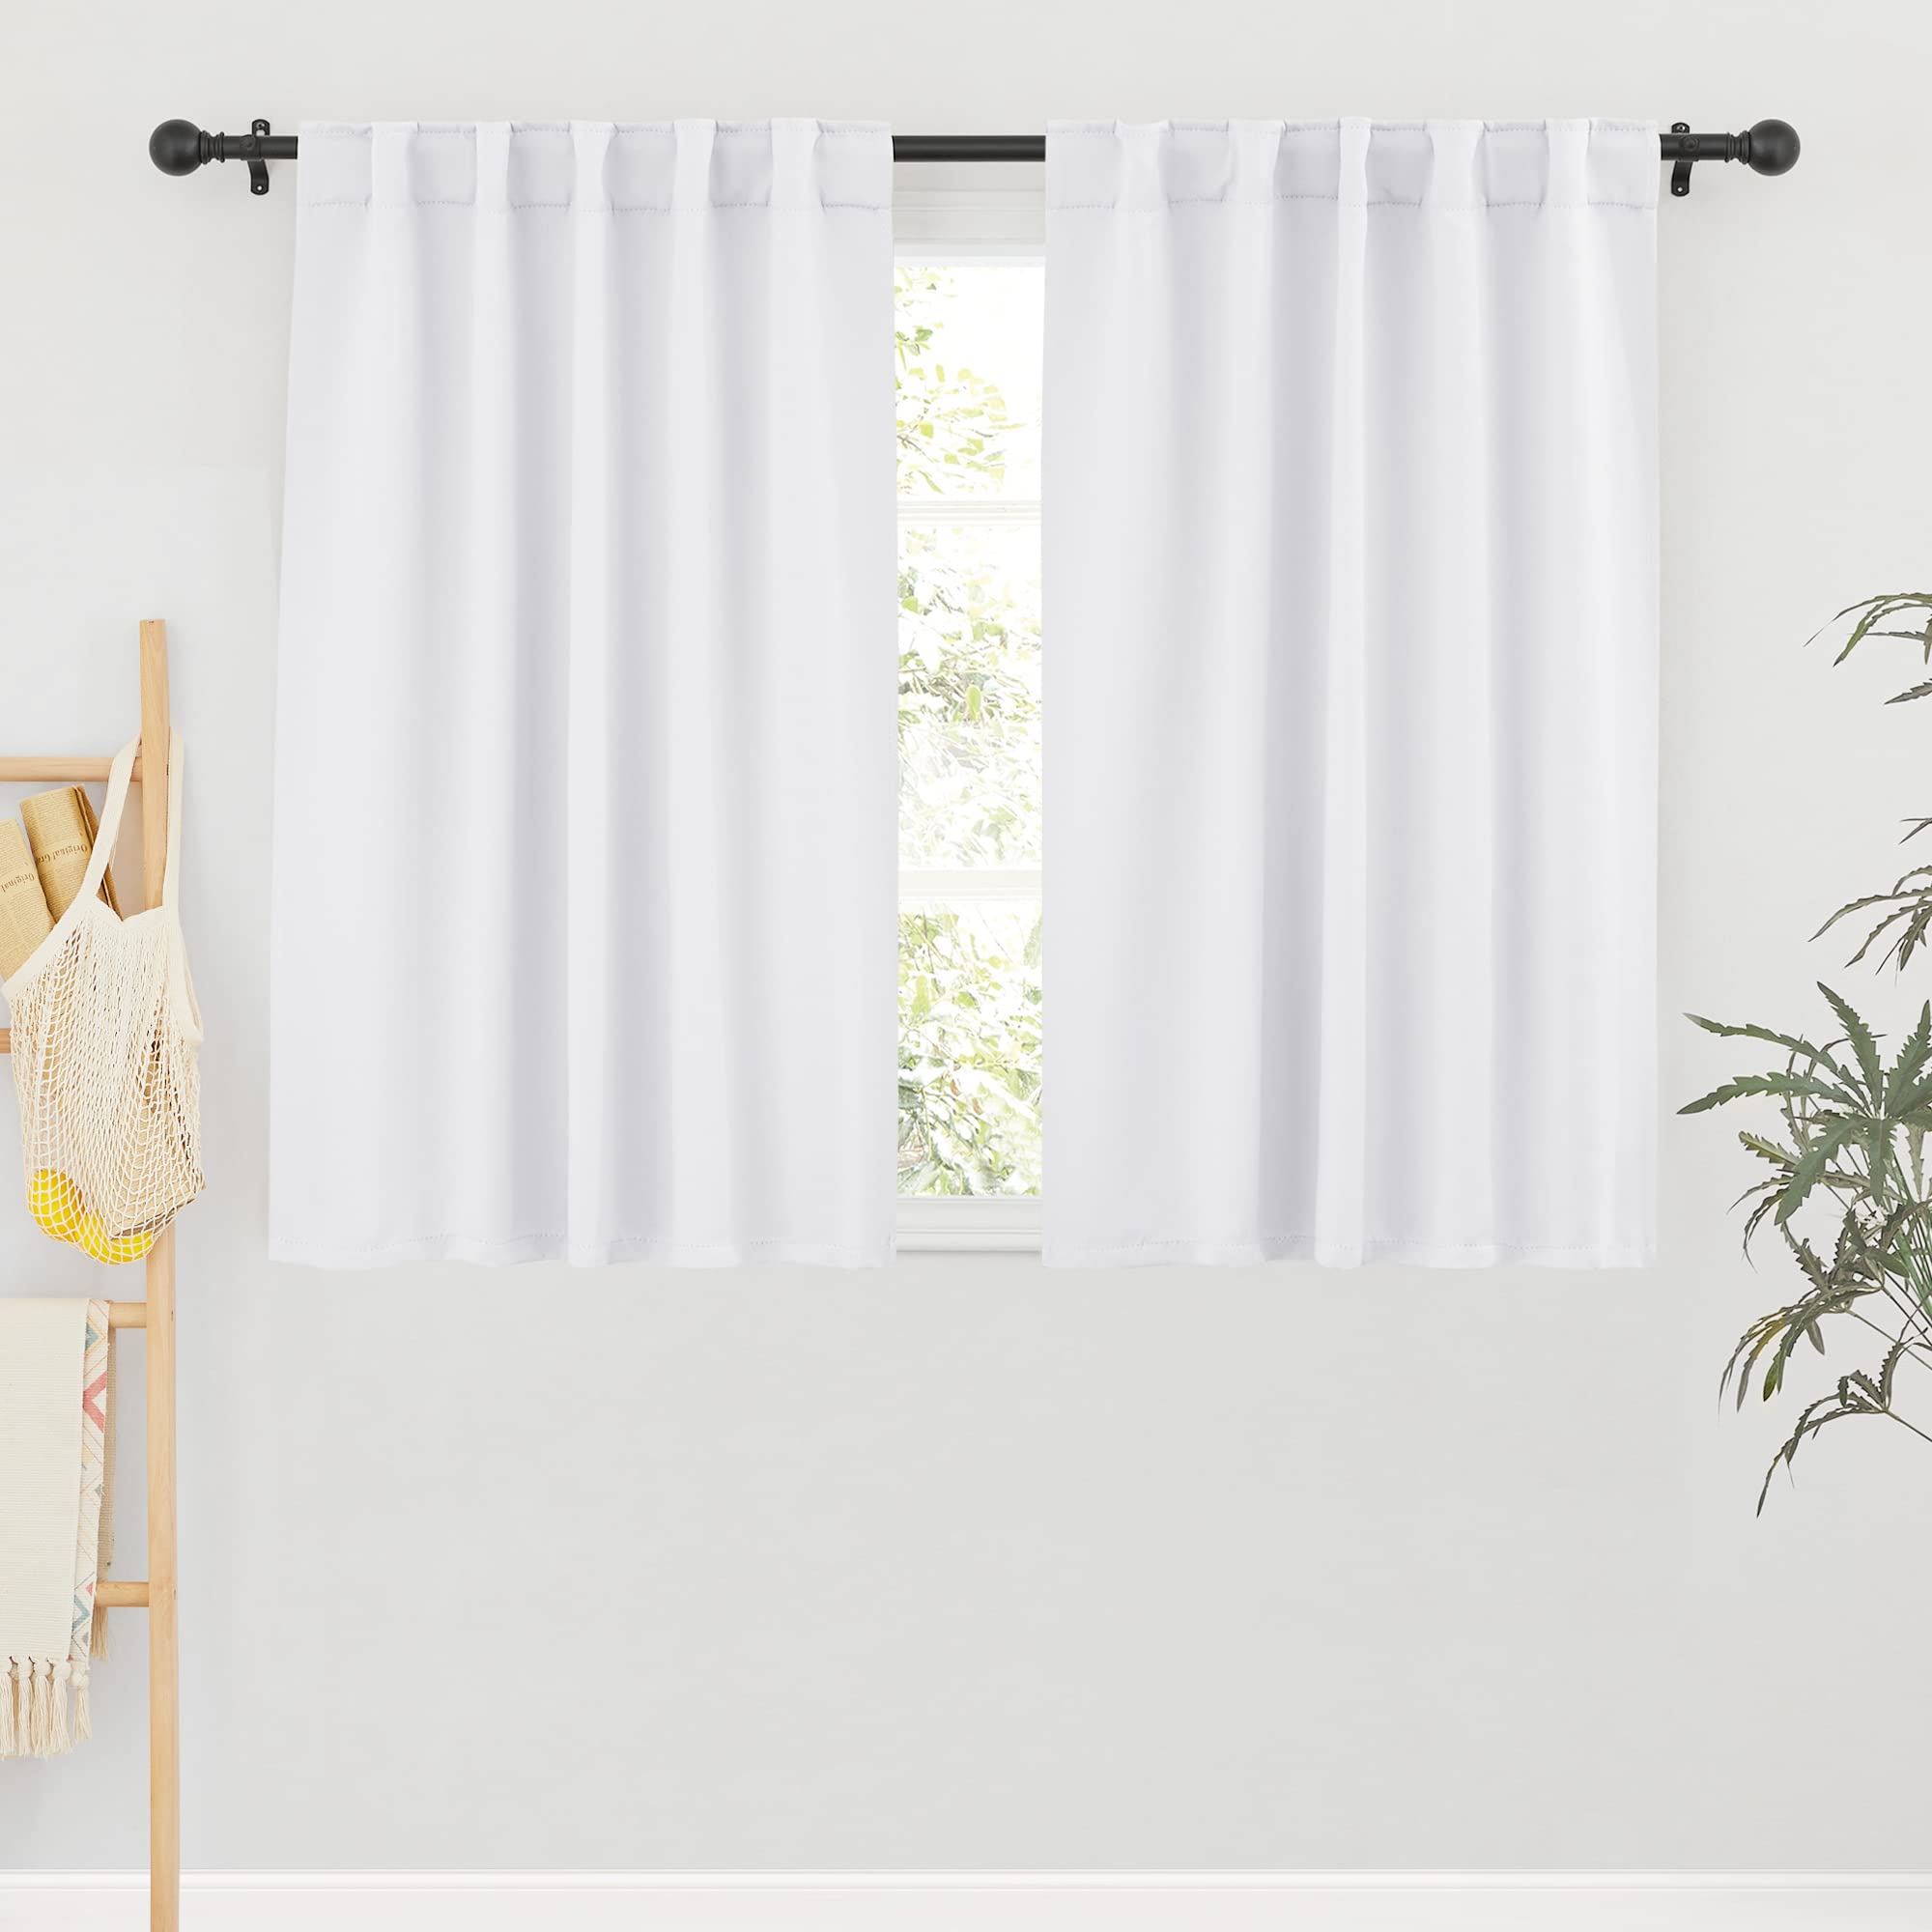 RYB HOME White curtains Drapes - Room Darkening Window curtains Thermal Insulated Bedroom Drapes Half Blackout curtain Set for L